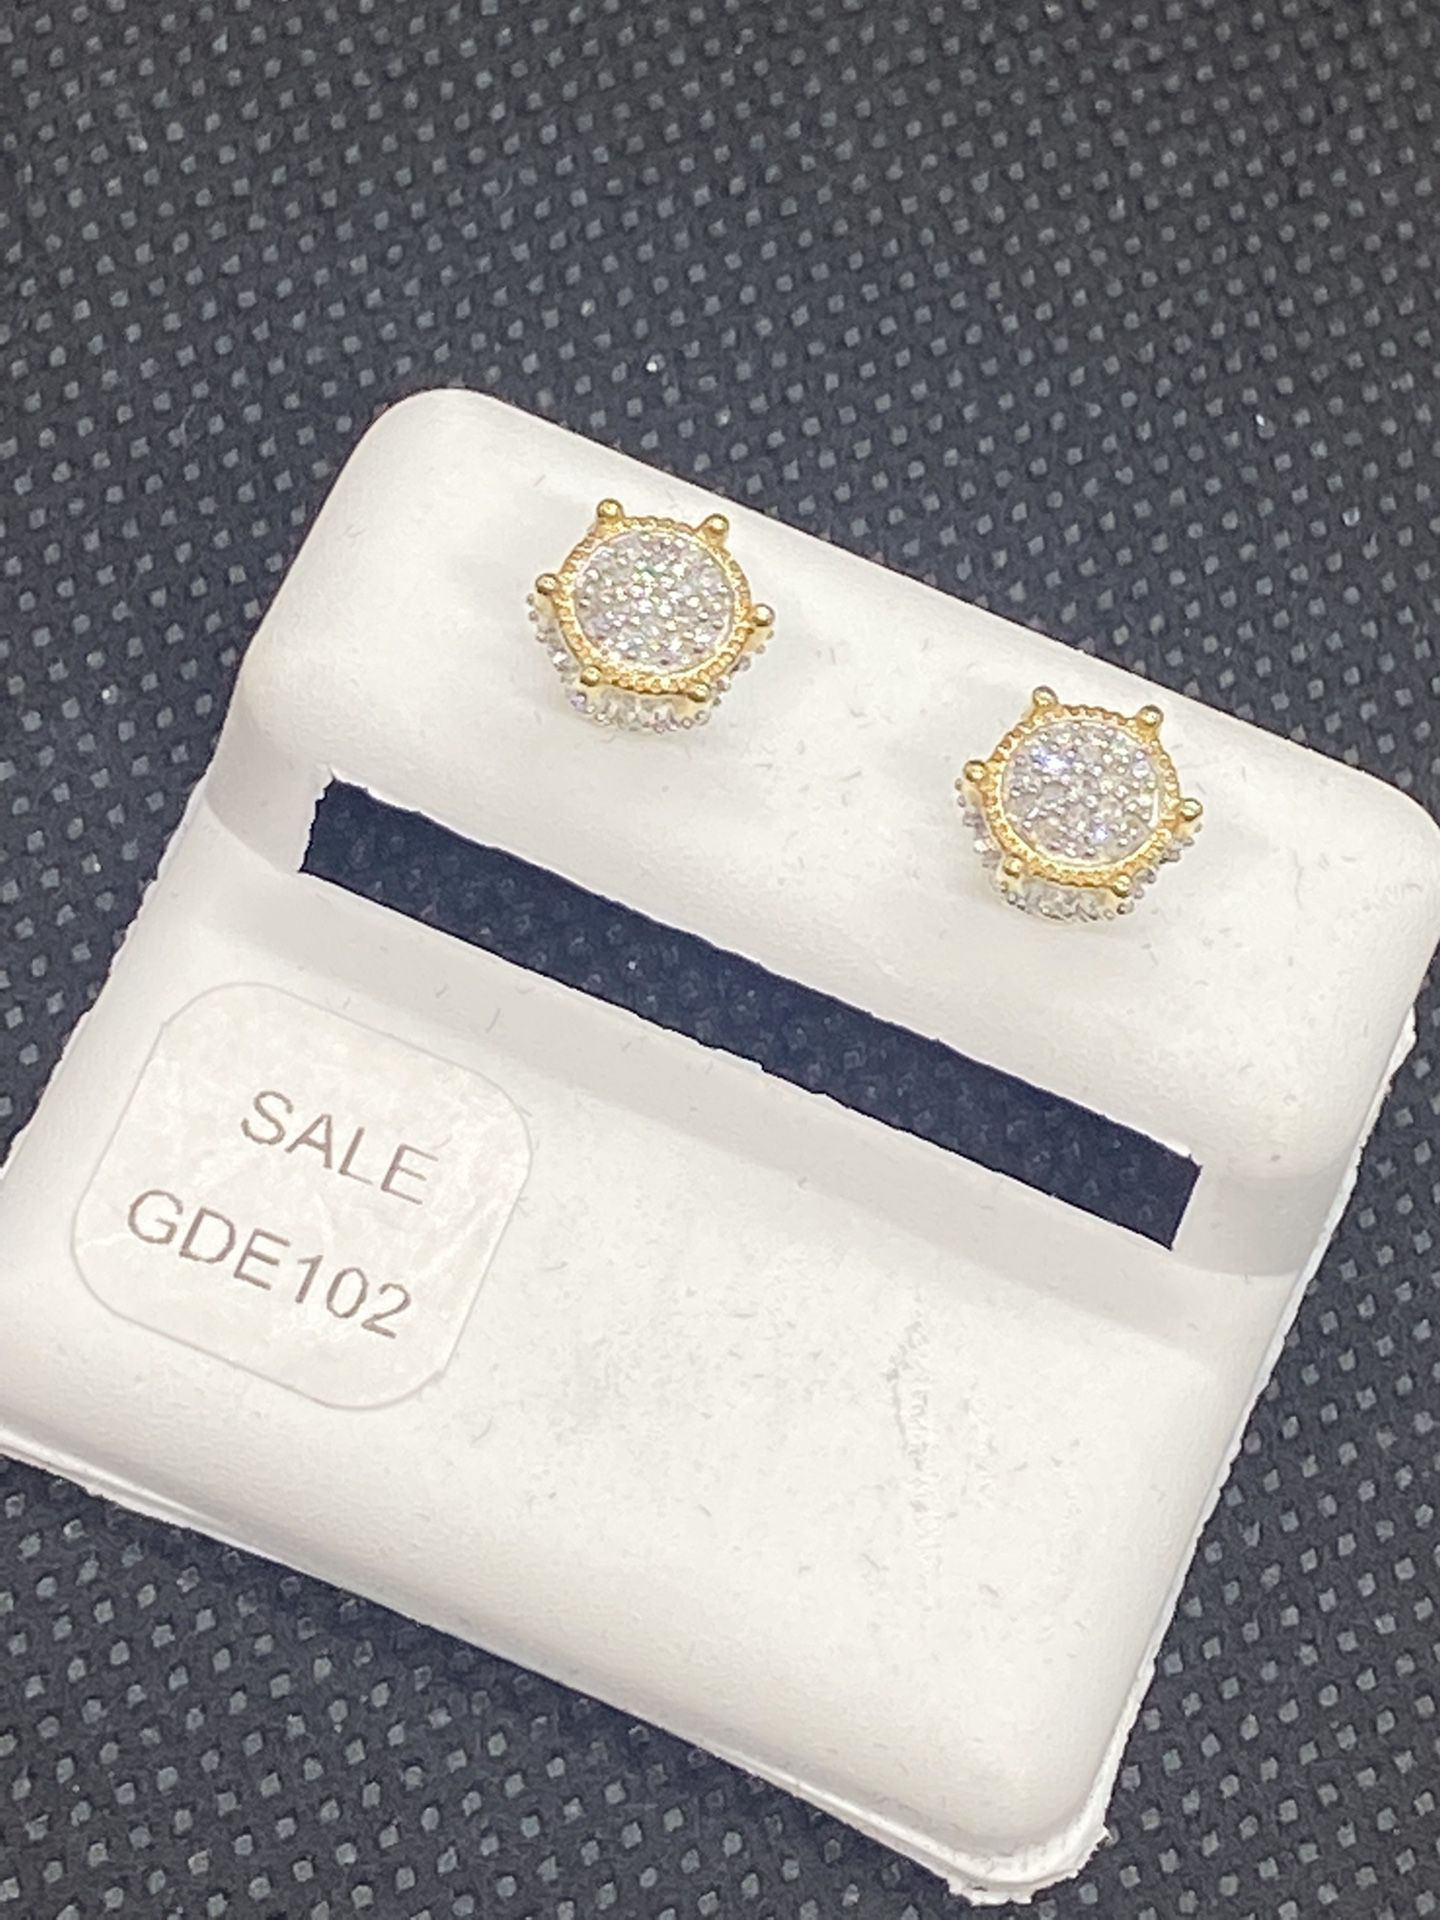 10KT GOLD AND DIAMOND EARRINGS OF 0.25 CTW AVAILABLE ON SPECIAL SALE 